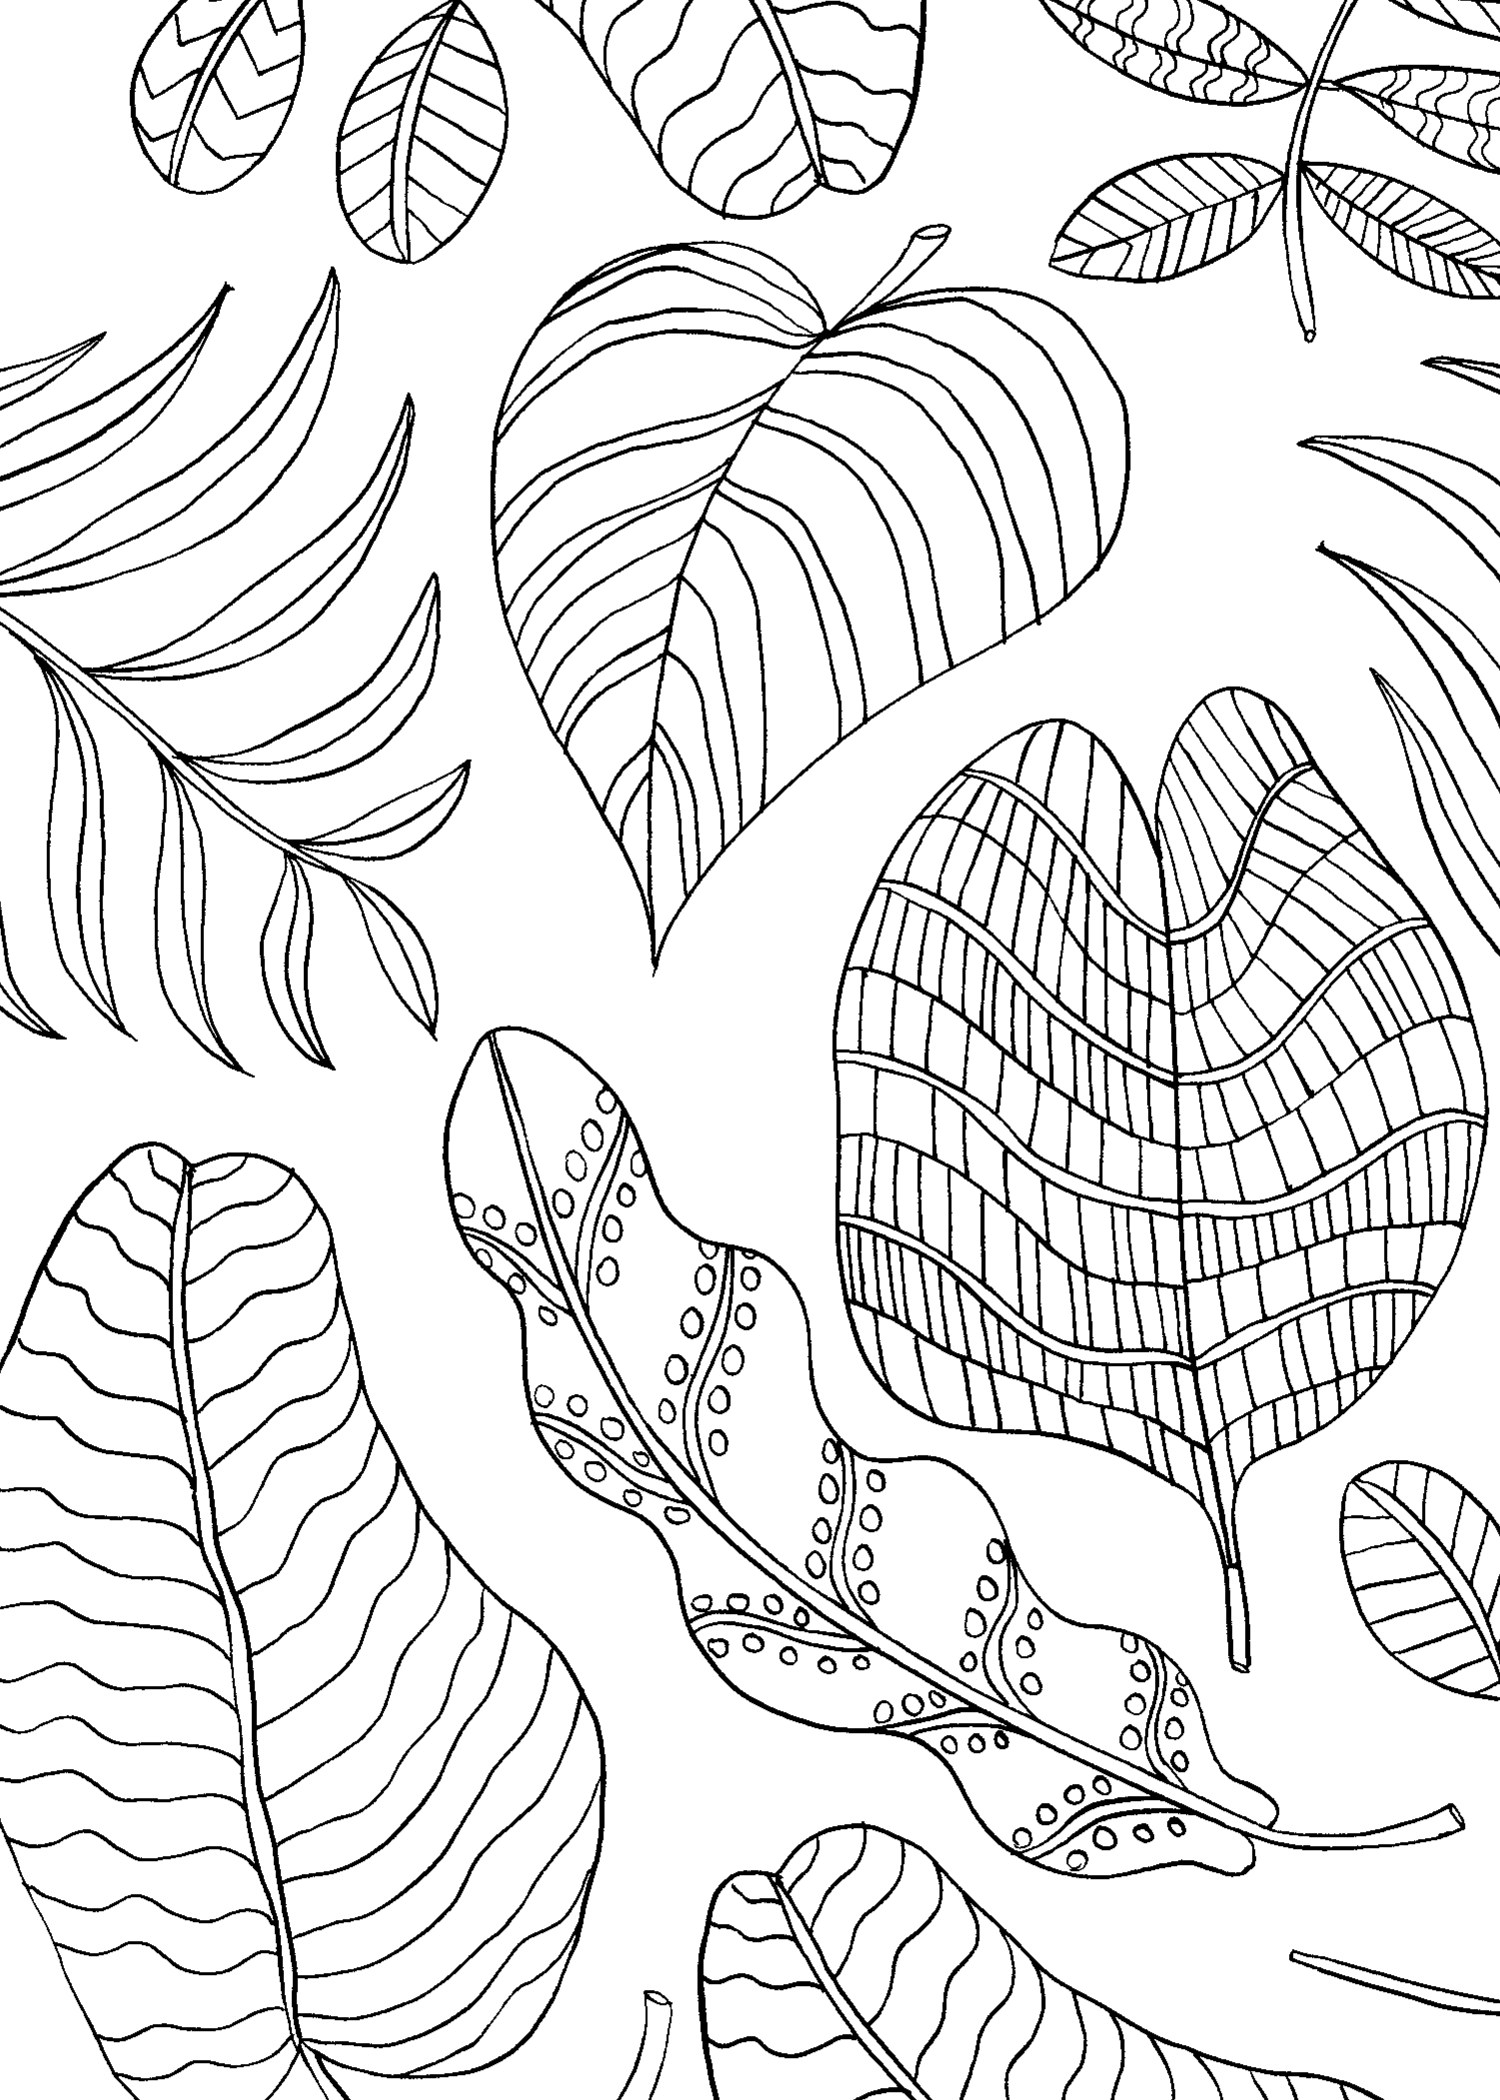 21-best-ideas-mindful-coloring-for-kids-home-family-style-and-art-ideas